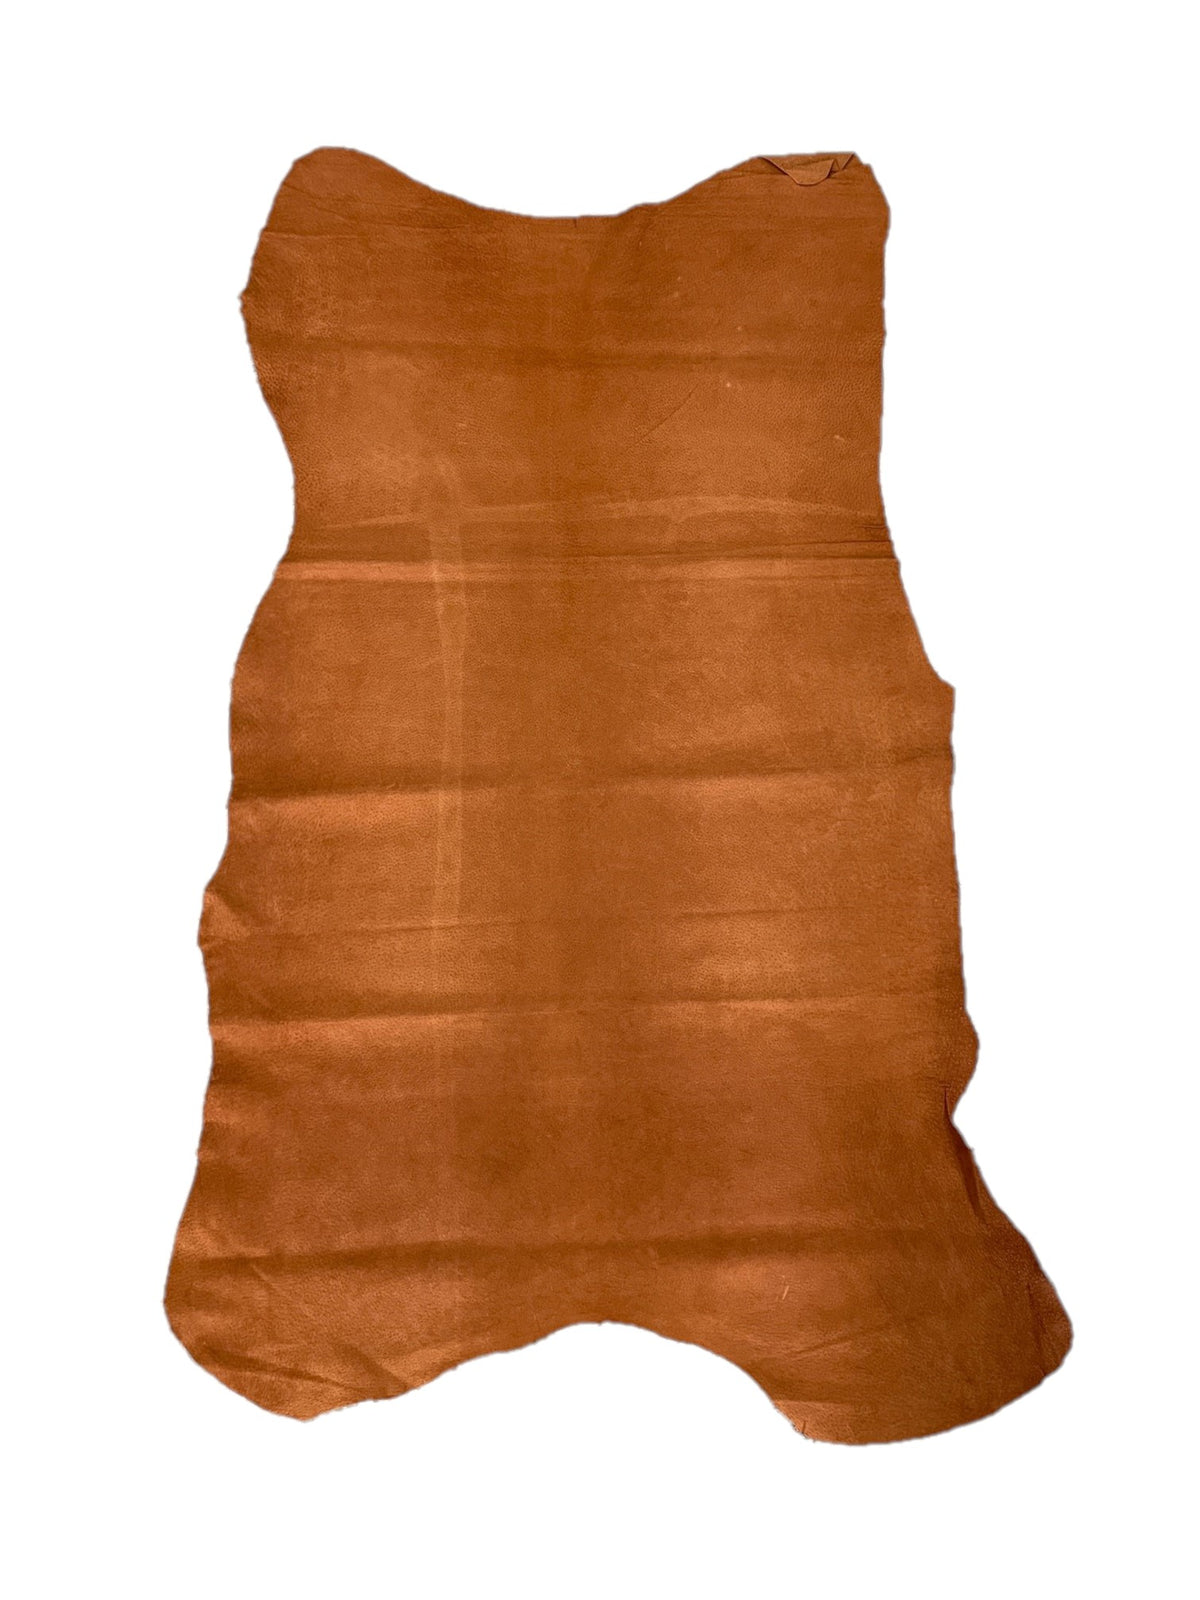 Pig Skin Suede | Rust | 0.6 mm | 8 sq.ft | From $25 ea.